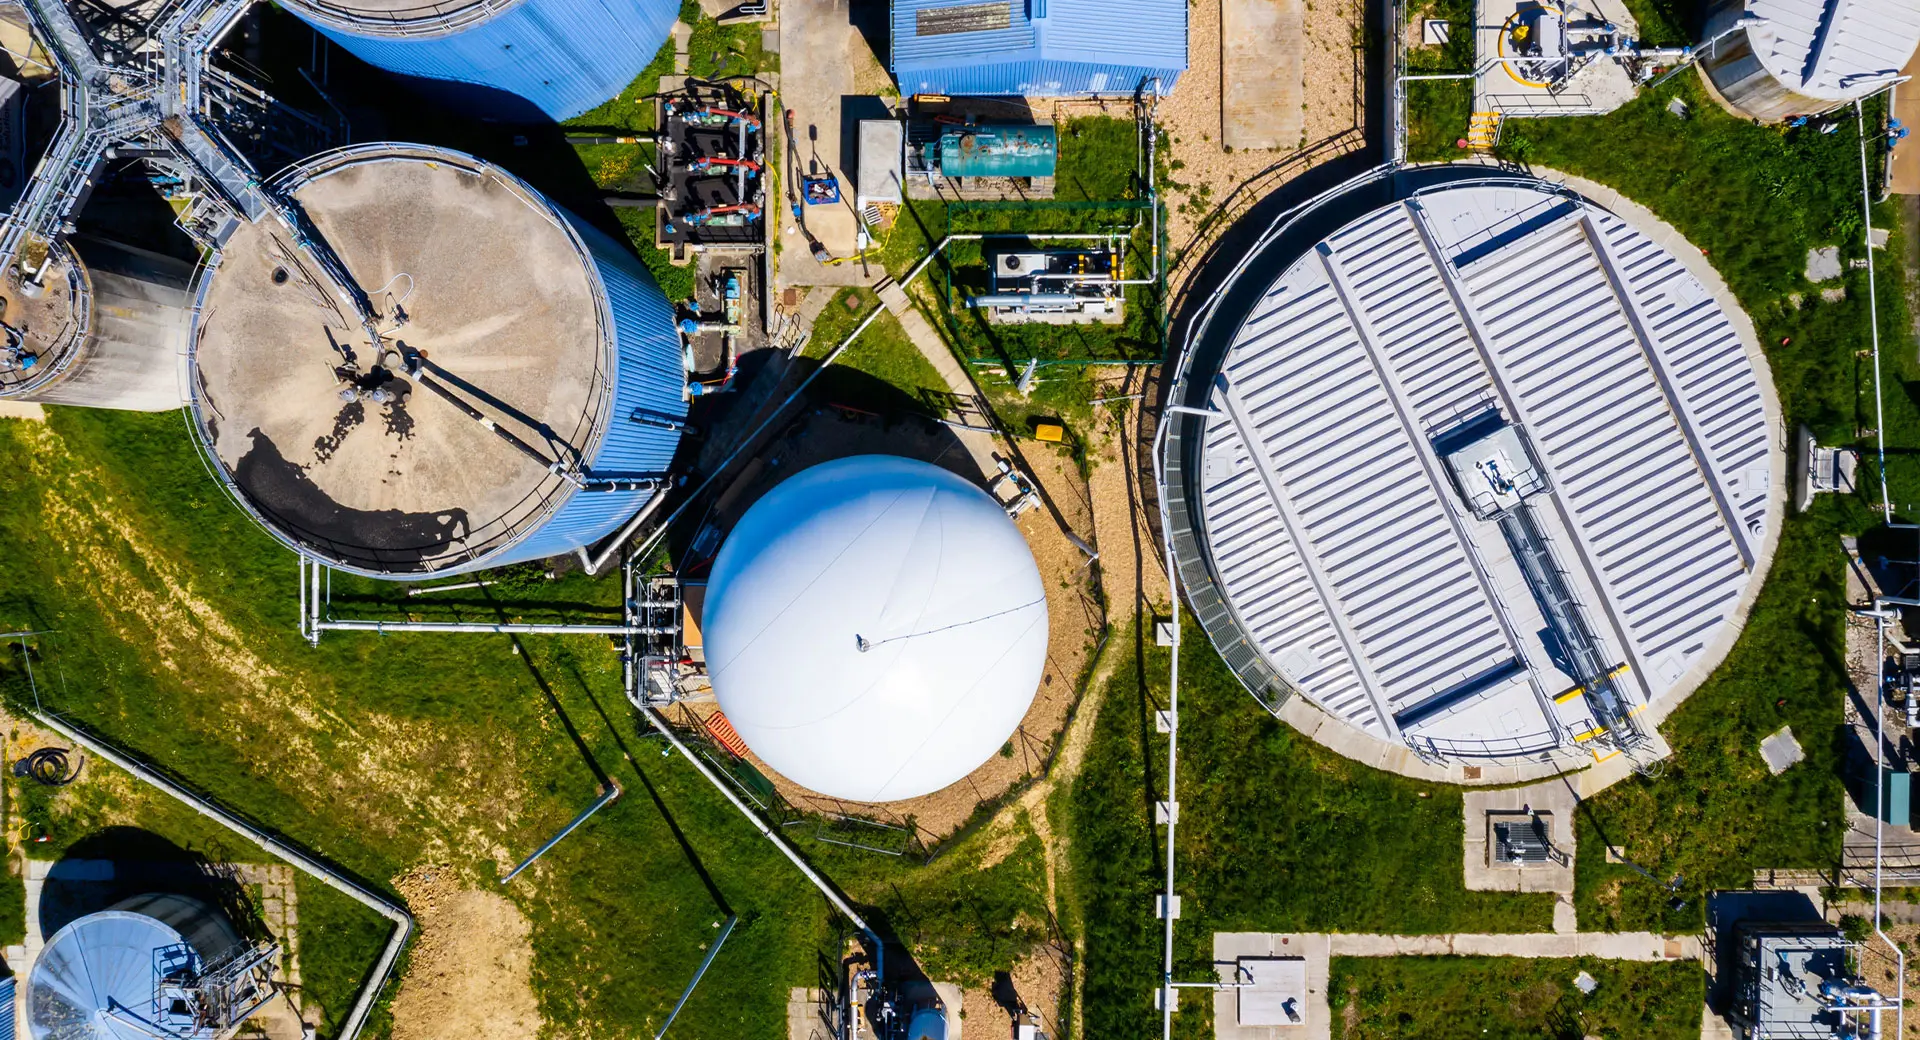 An aerial view of the Goddards Green Wastewater Treatment Works